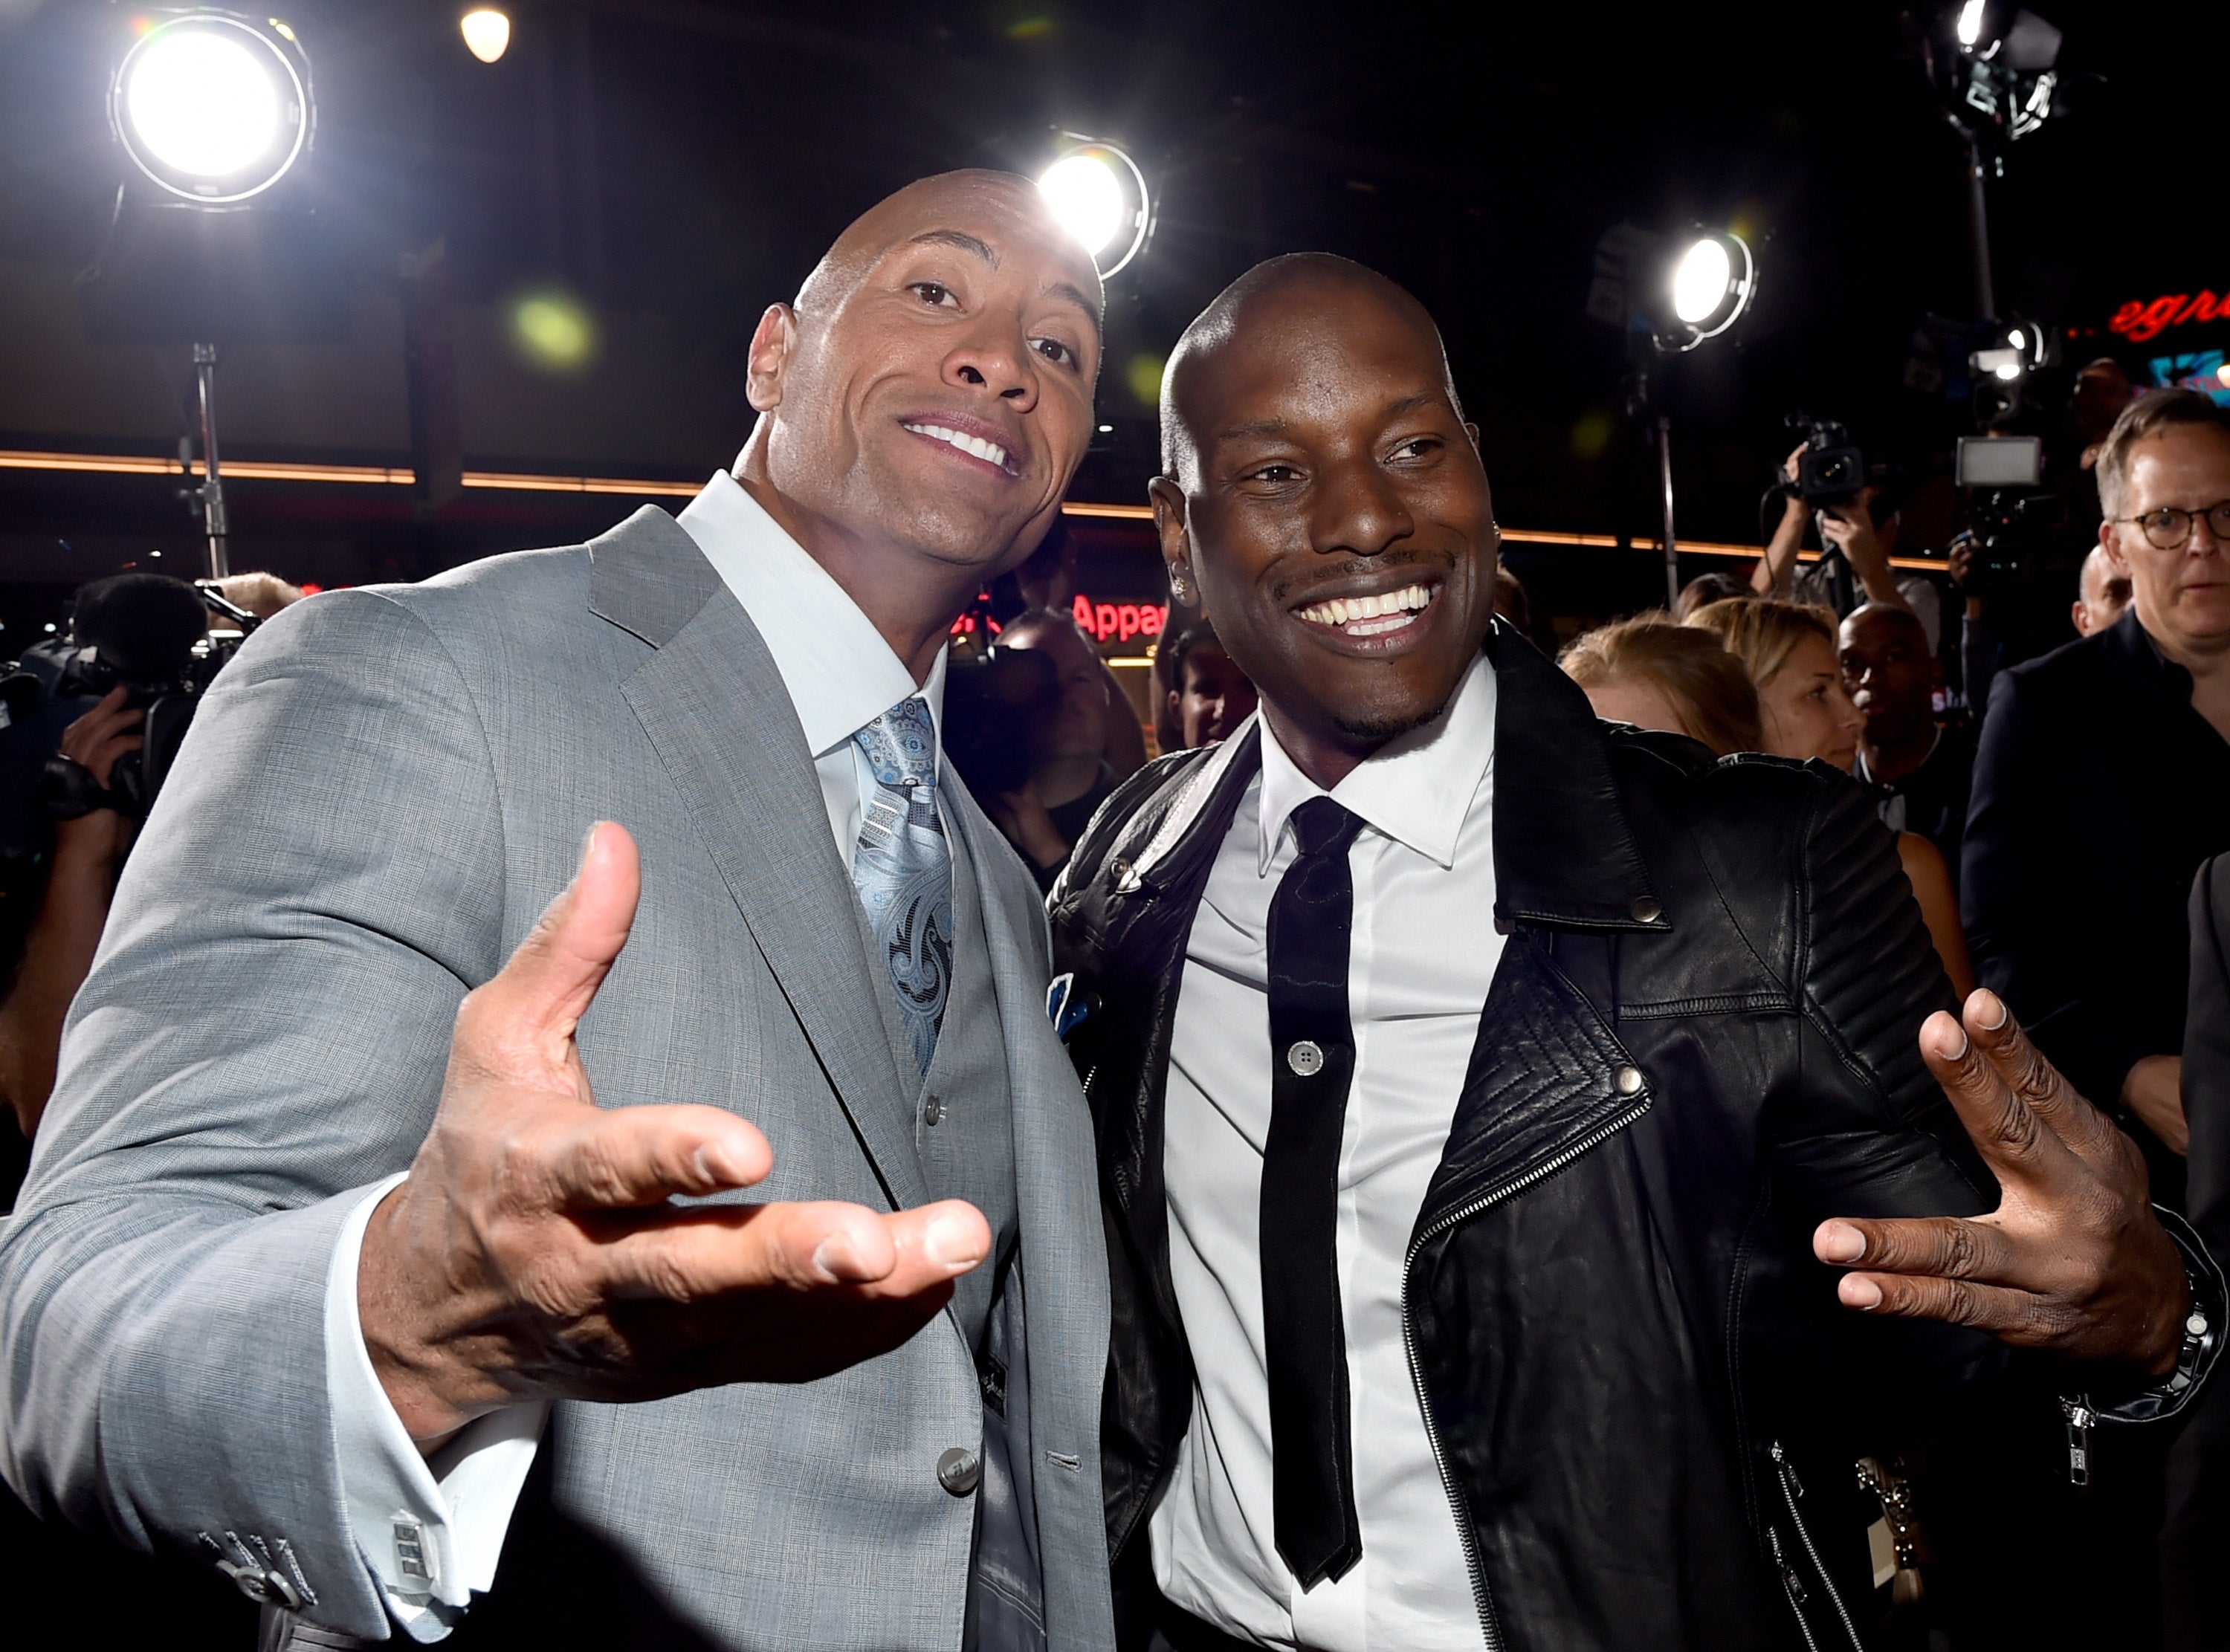 How The Heck Did This Beef Between Tyrese And The Rock Begin?